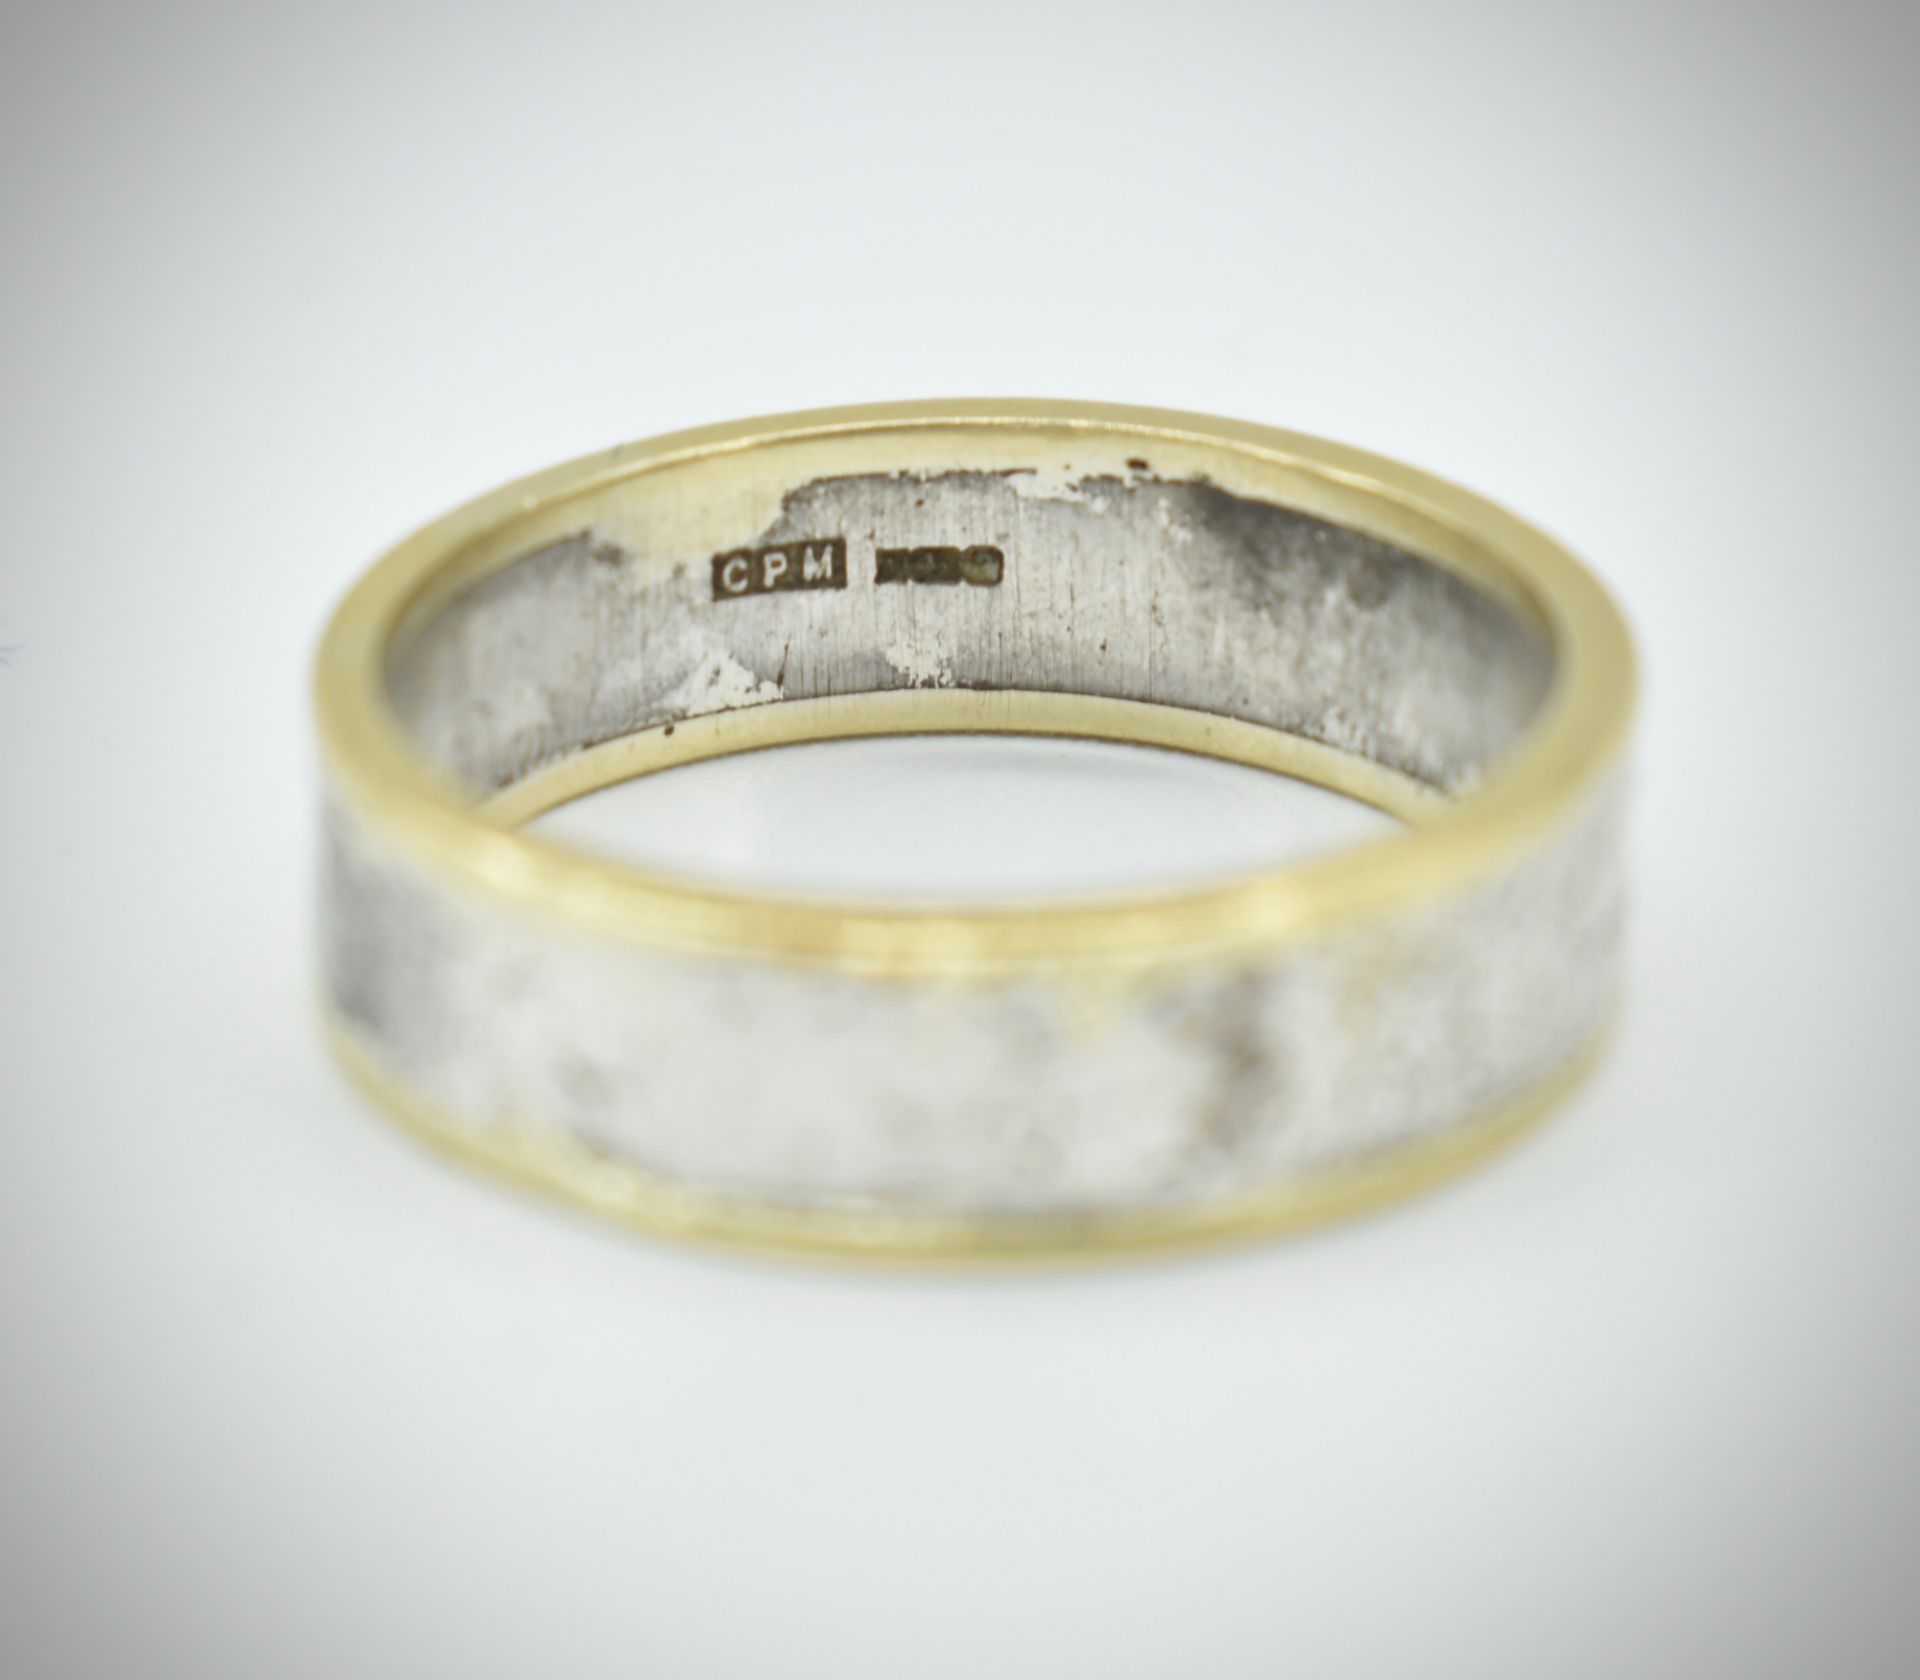 A 9ct White & Yellow Gold Bi-Coloured Band Ring - Image 2 of 2